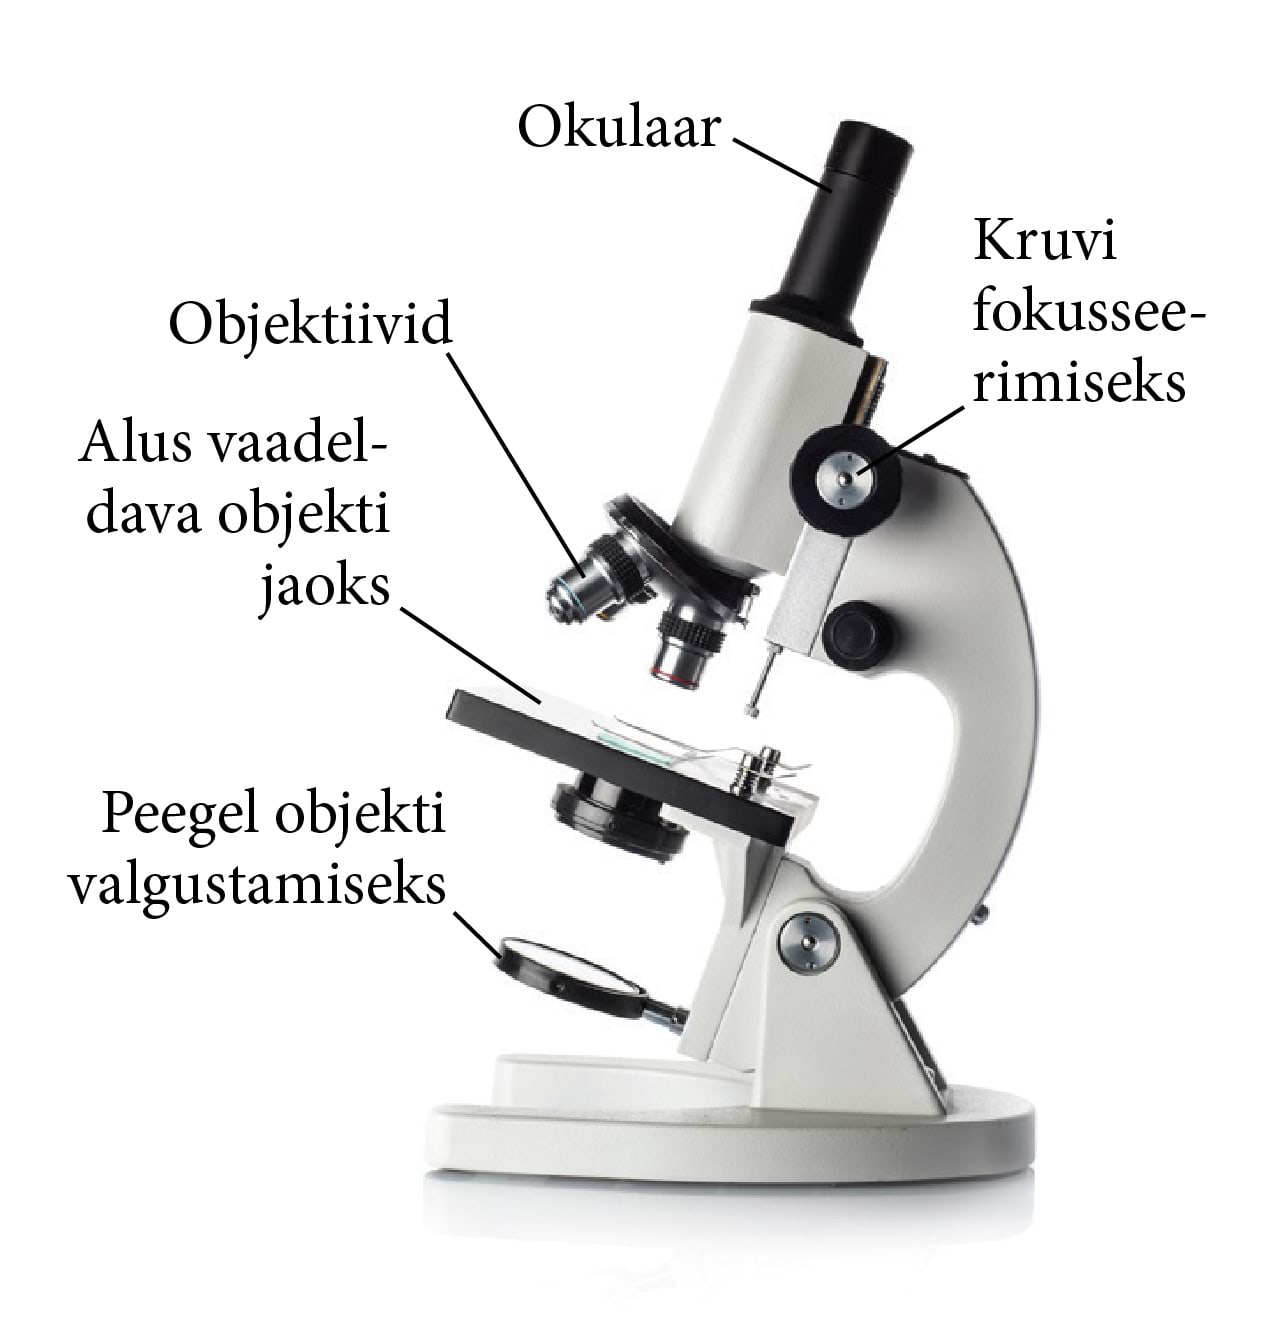 The basic parts of a microscope